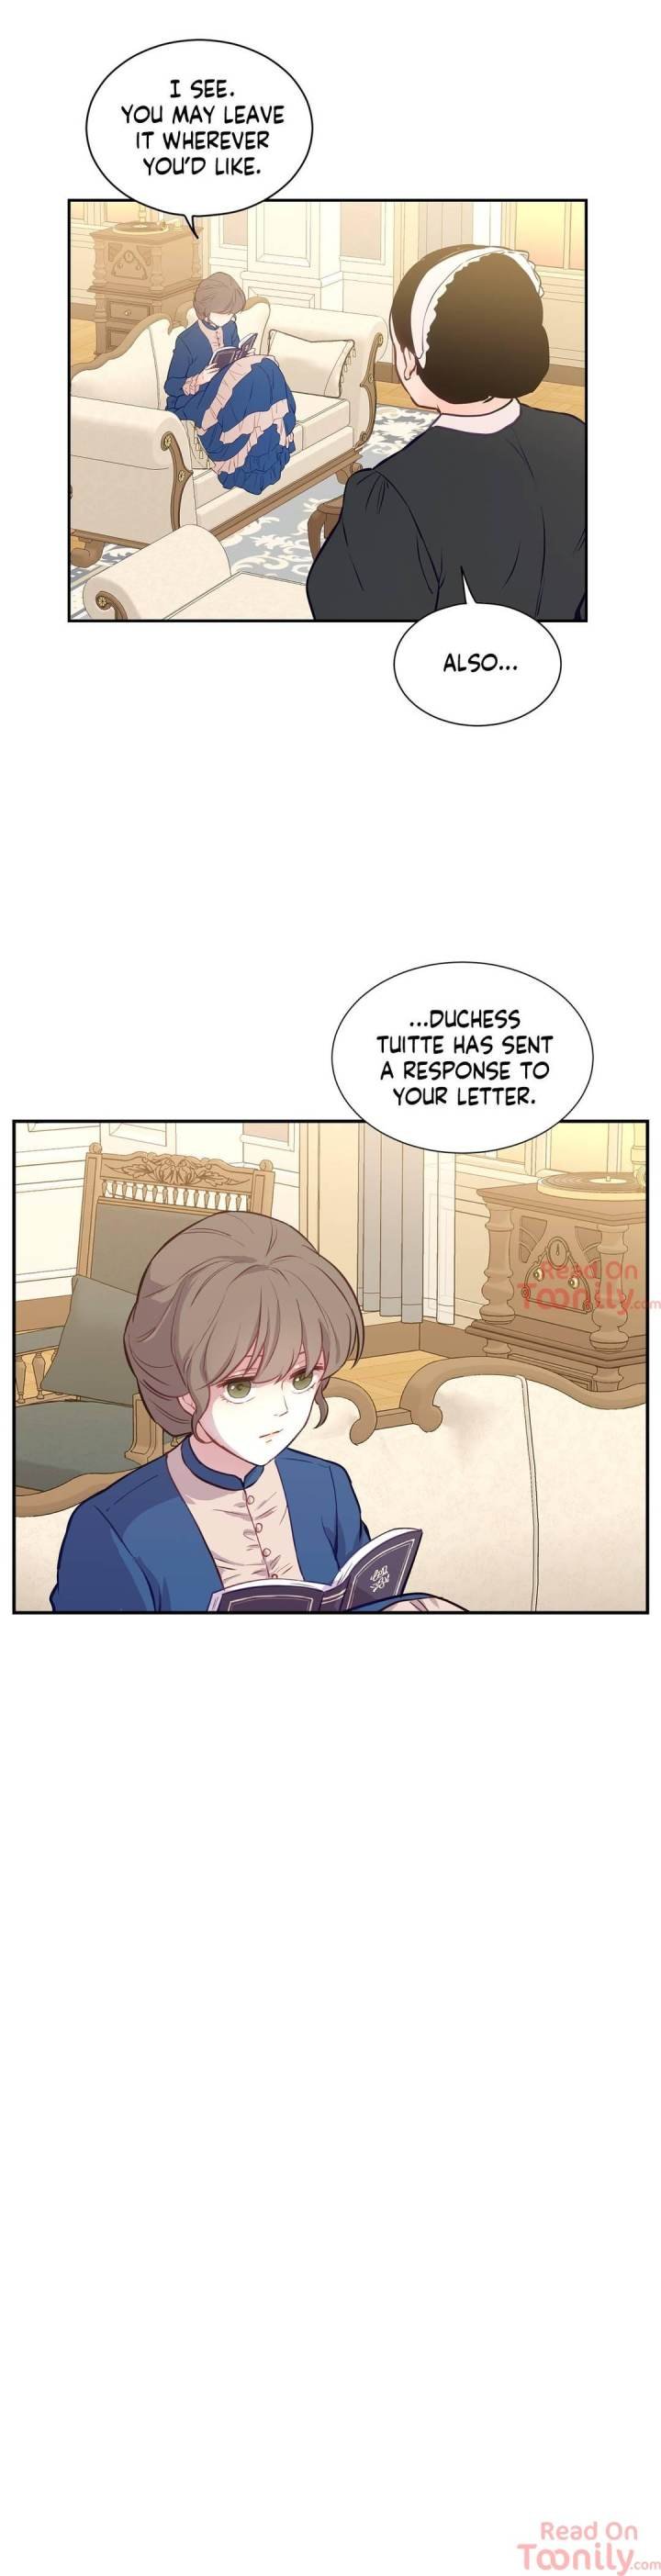 the-blood-of-madam-giselle-chap-3-21